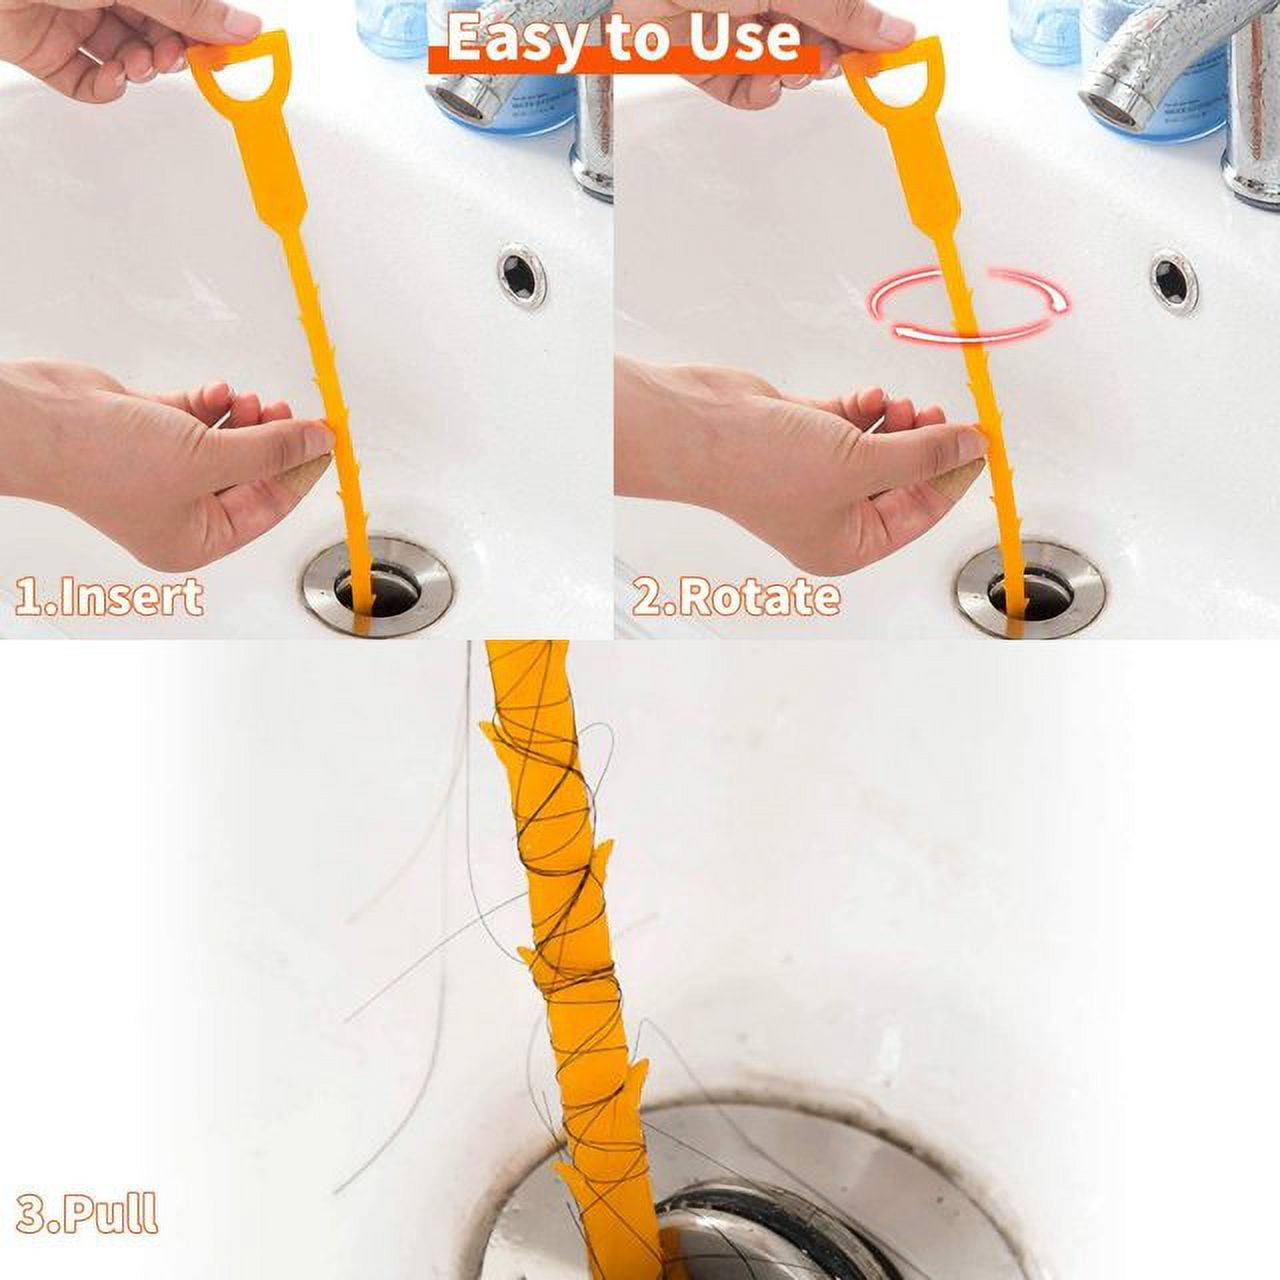 FOMMEN 6 Pack Clog Remover Drain Relief Auger Cleaner Tool,Sink Drain and  snake Overflow Cleaning Brush, Sewer Hair Catcher,(Bathroom Tub, Toilet, Clogged Drains…